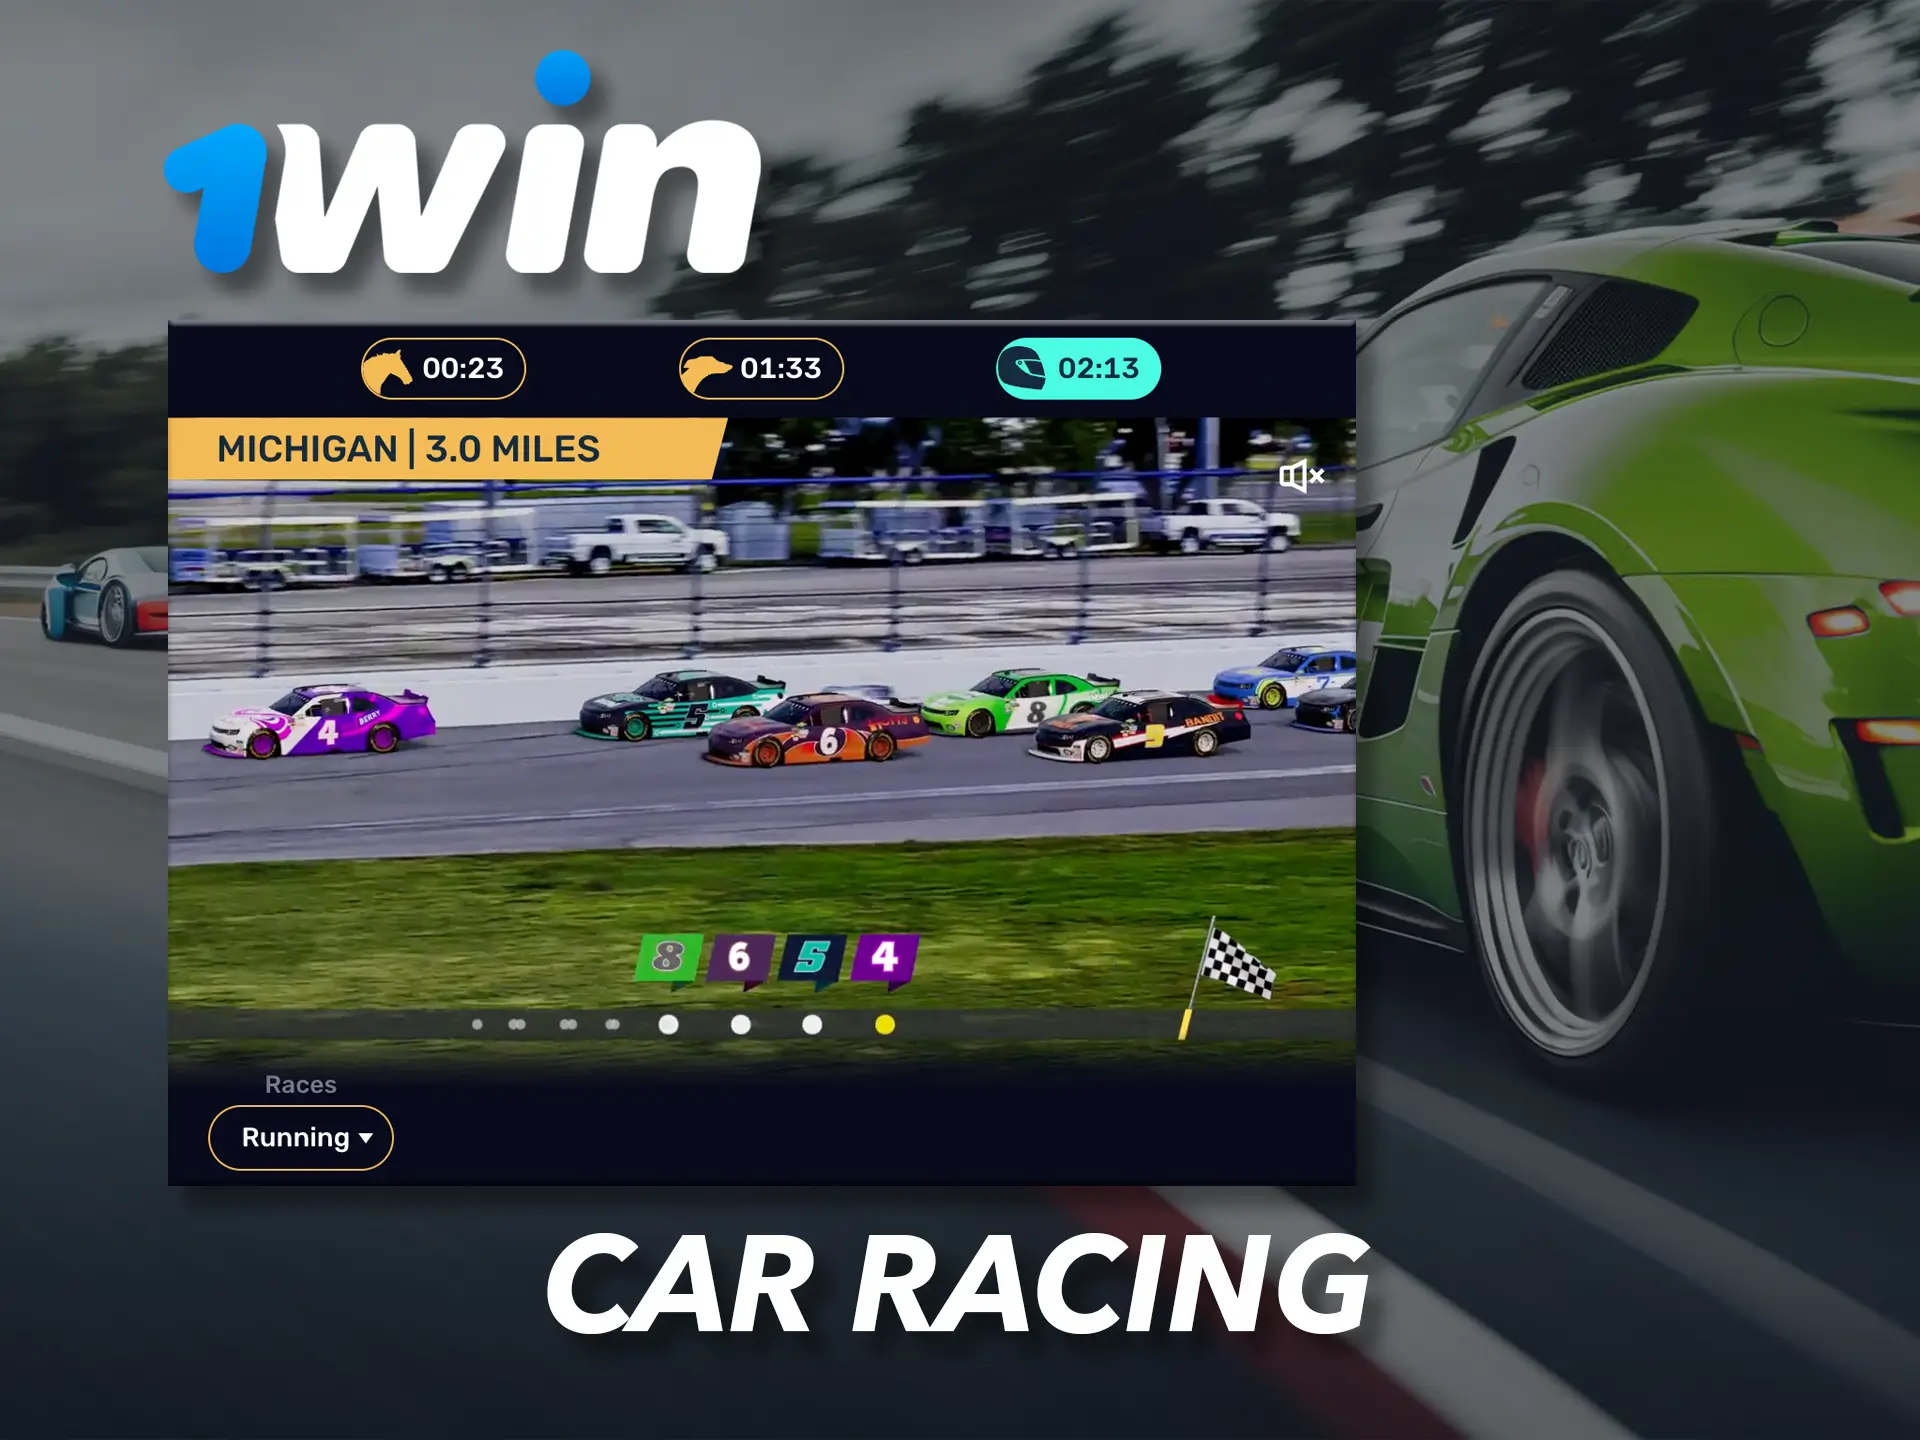 You'll find speed and drive in virtual racing from 1Win.